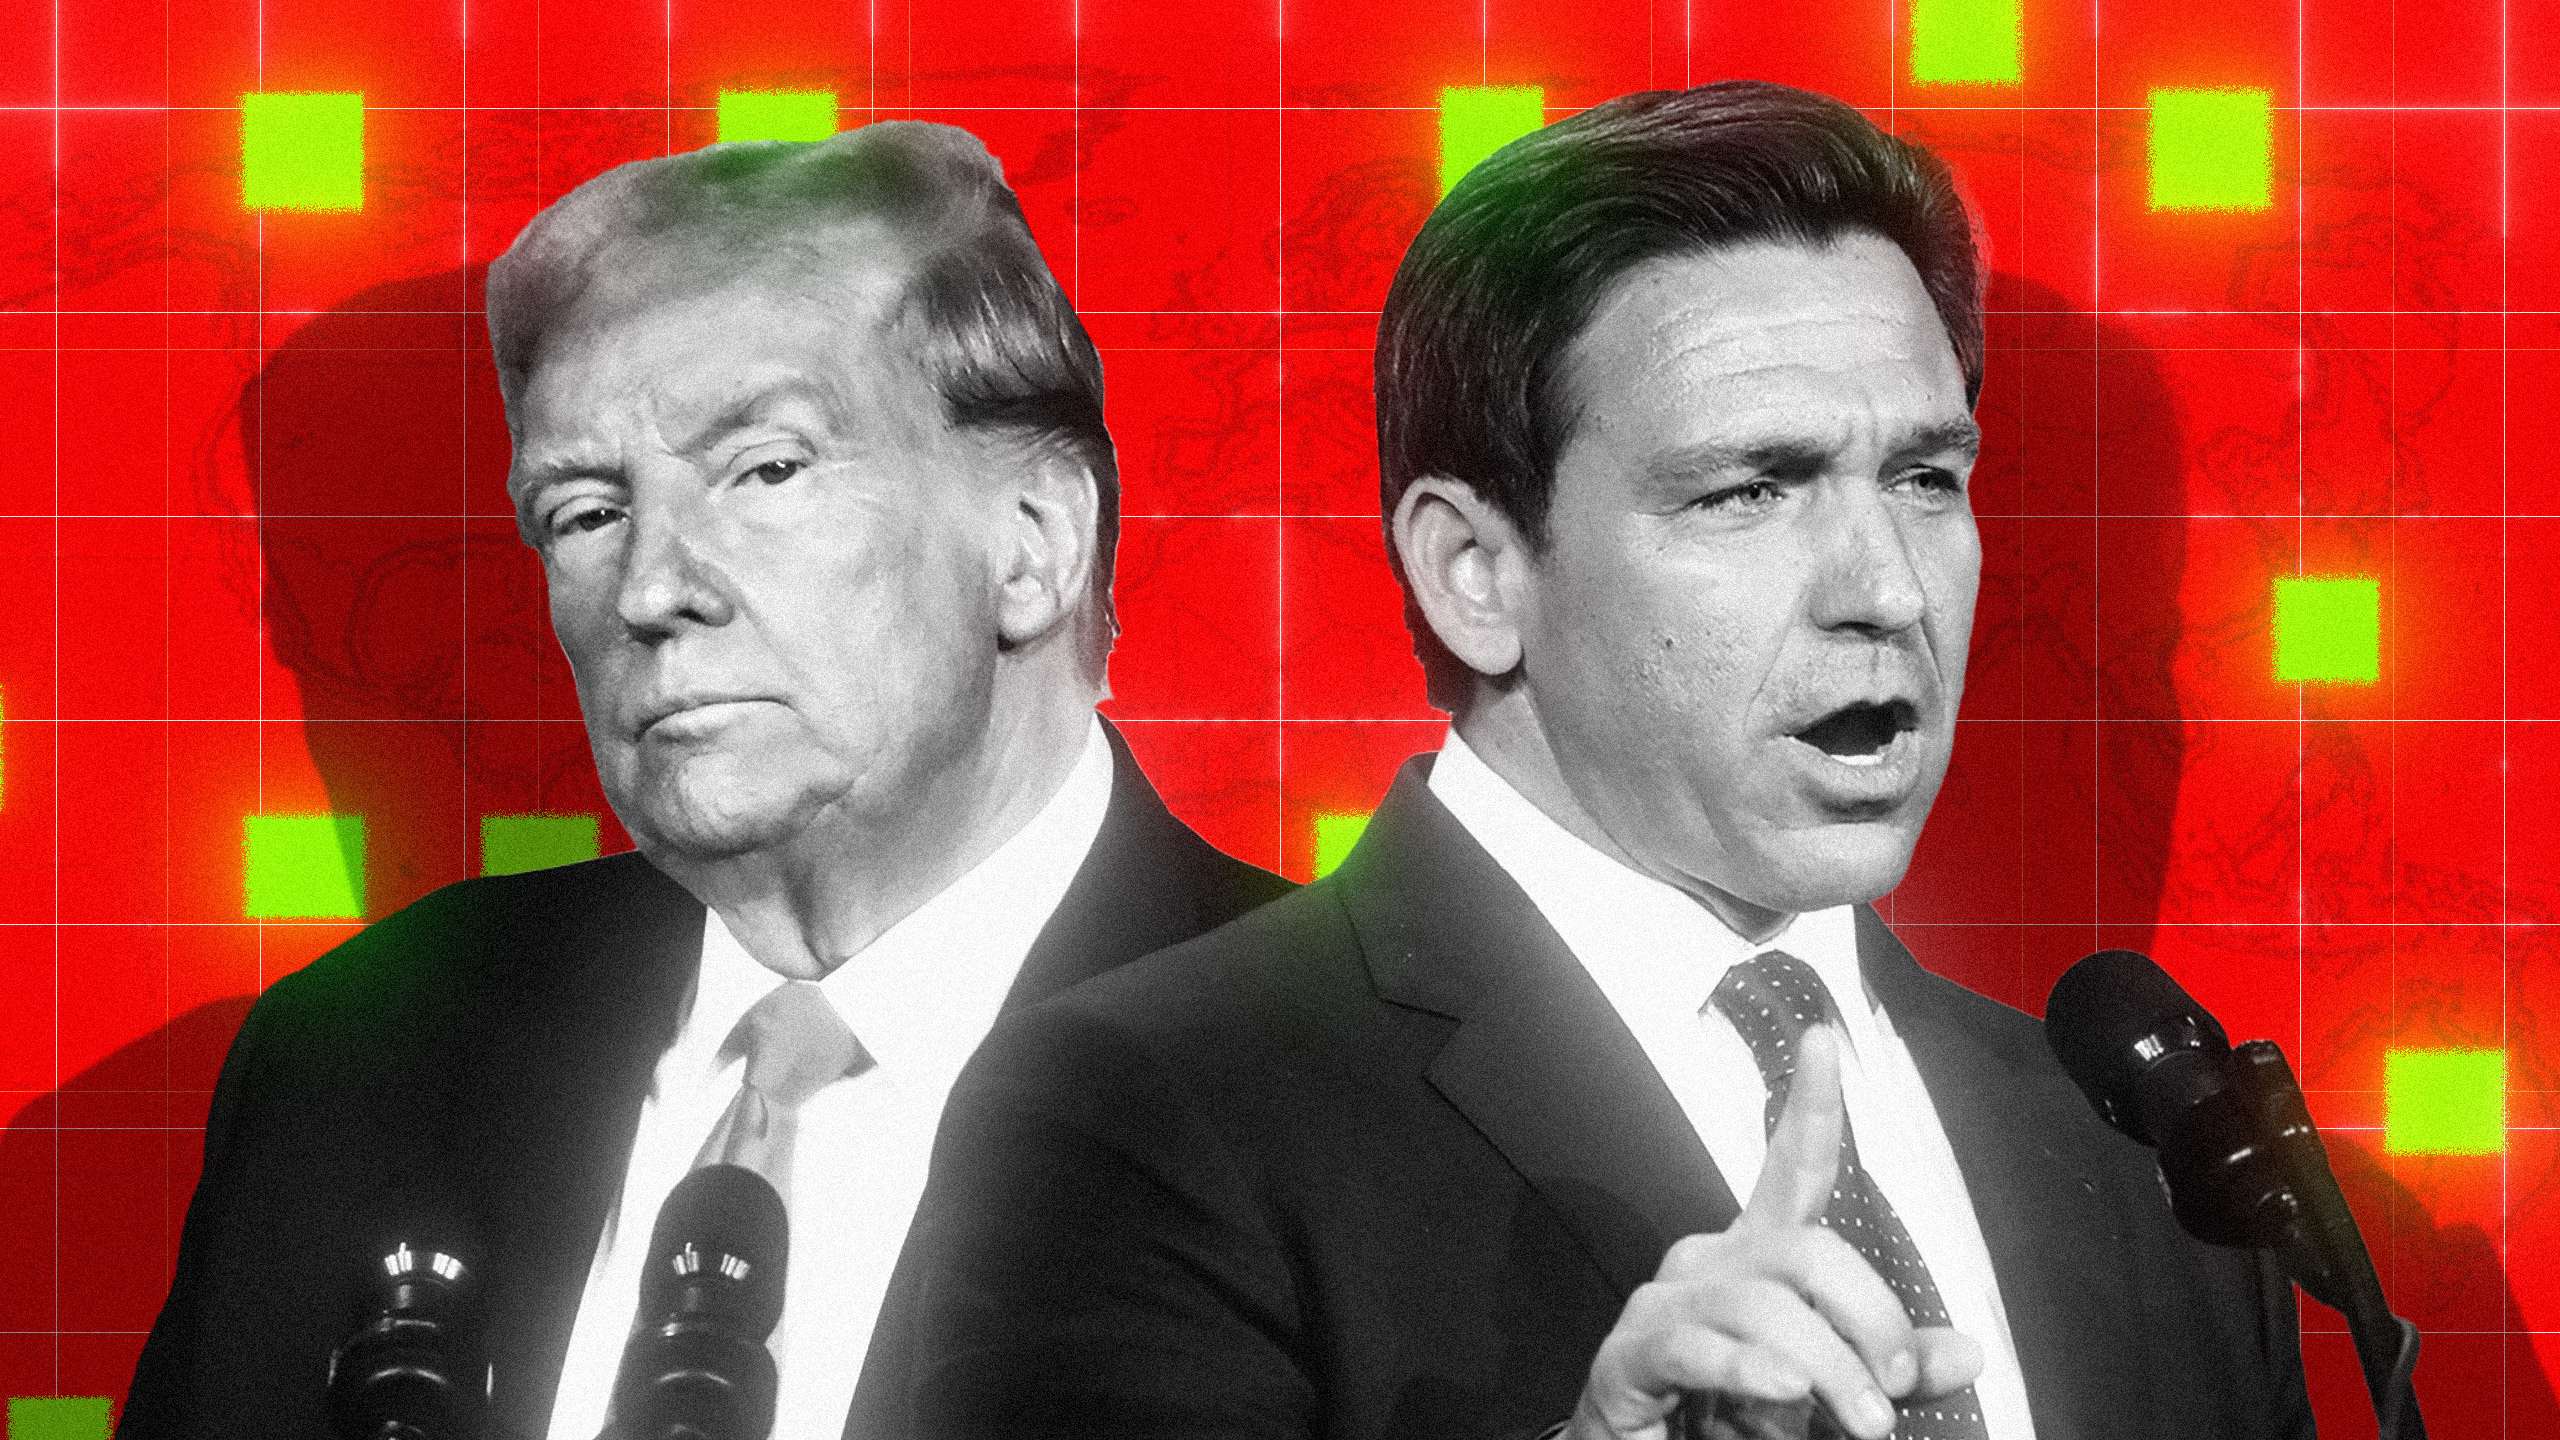 Trump and DeSantis Won't Stop at Keeping Out Illegal Immigrants